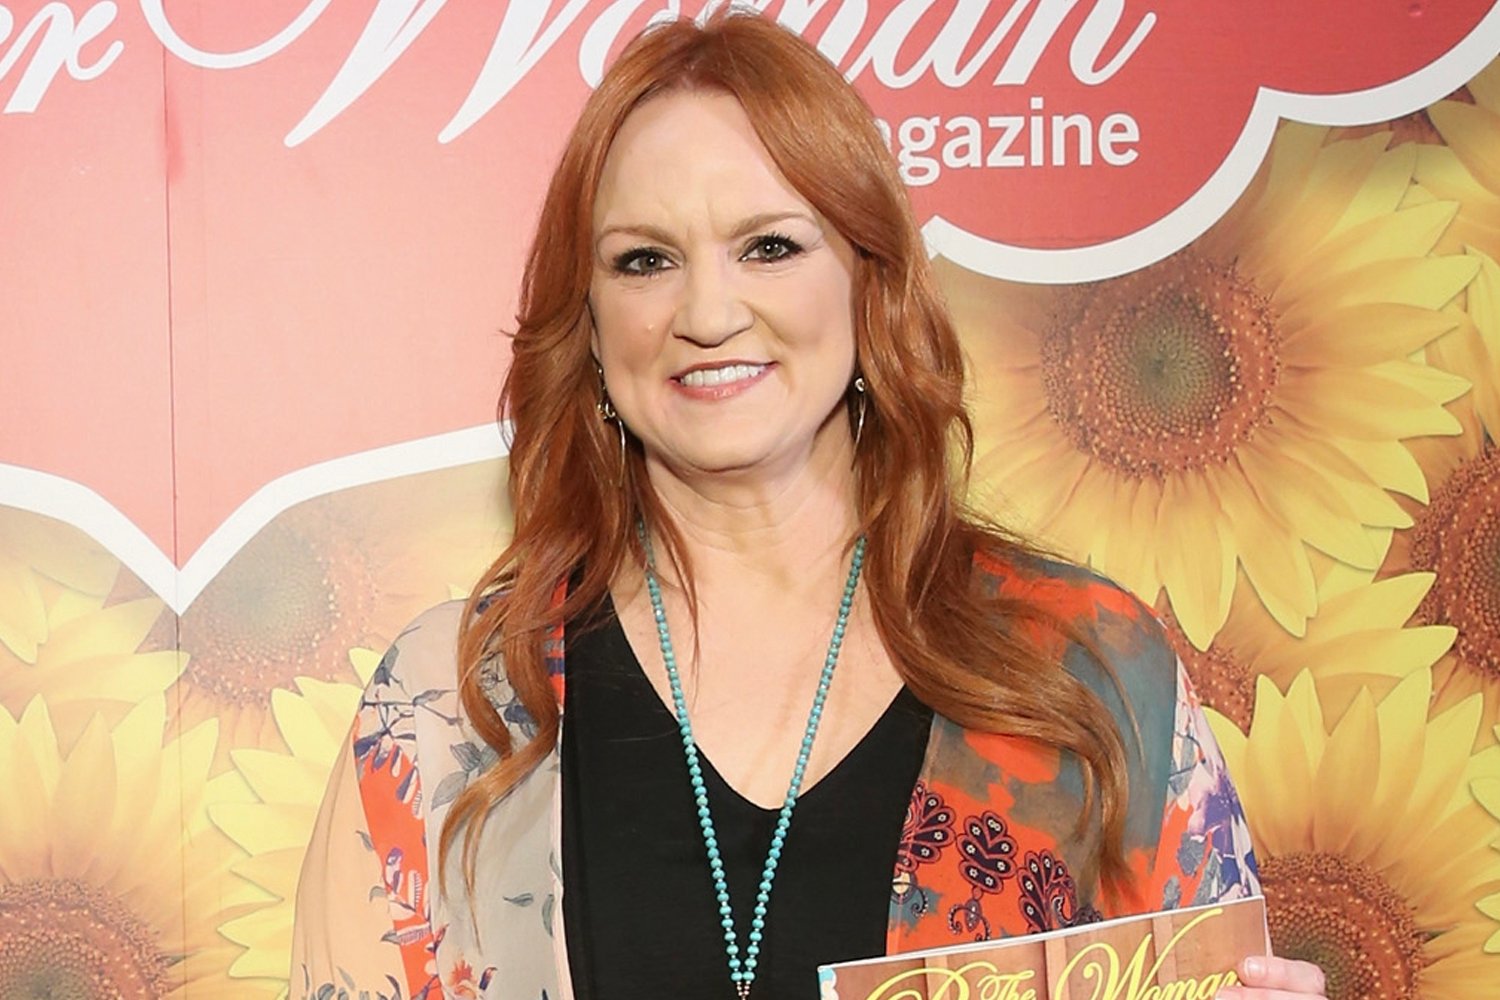 Ree Drummond smiles holding a copy of 'The Pioneer Woman' magazine